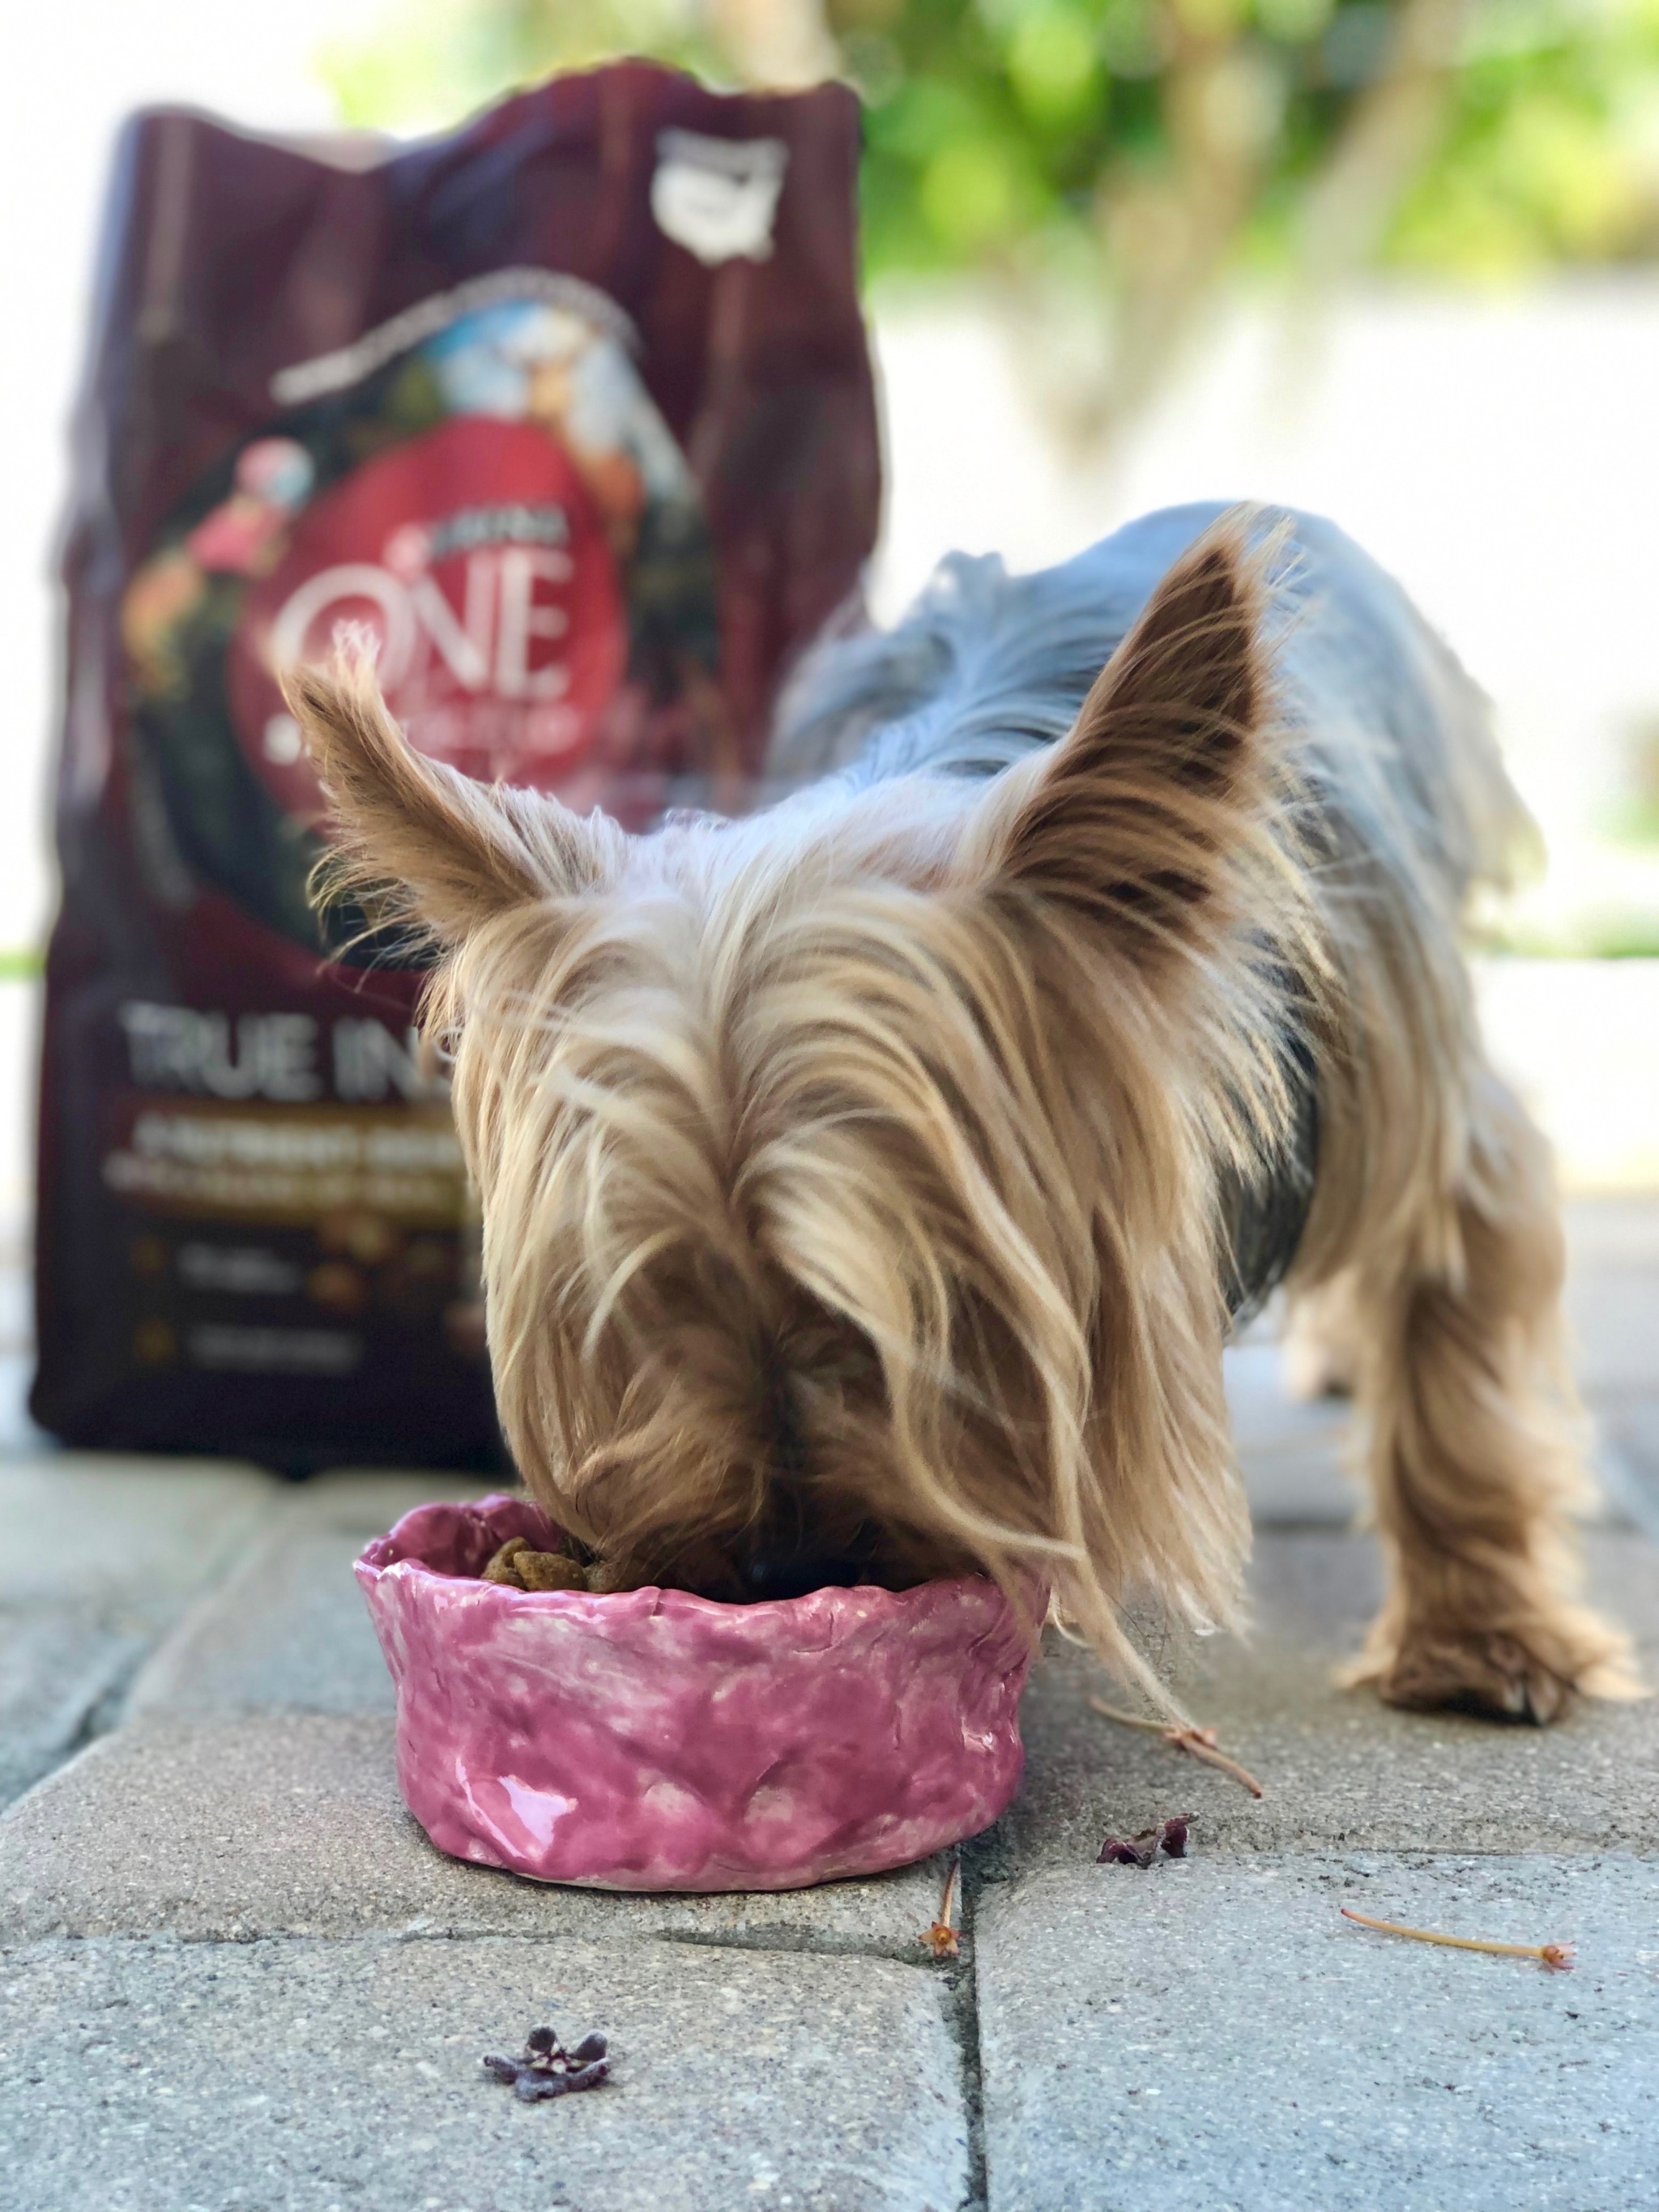 5 Steps for Choosing the Right Dog Food